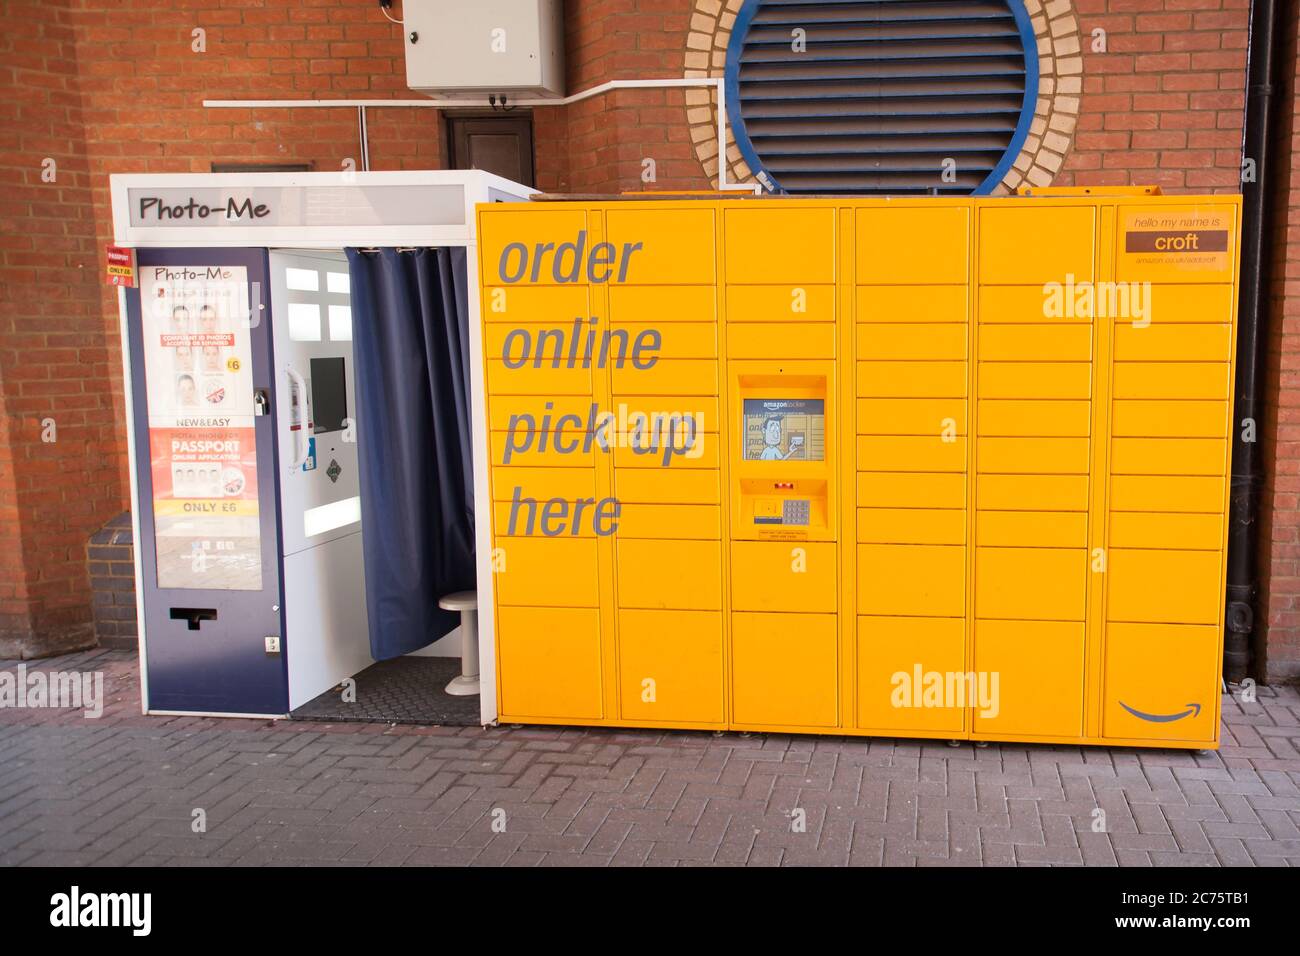 Amazon Locker High Resolution Stock Photography and Images - Alamy